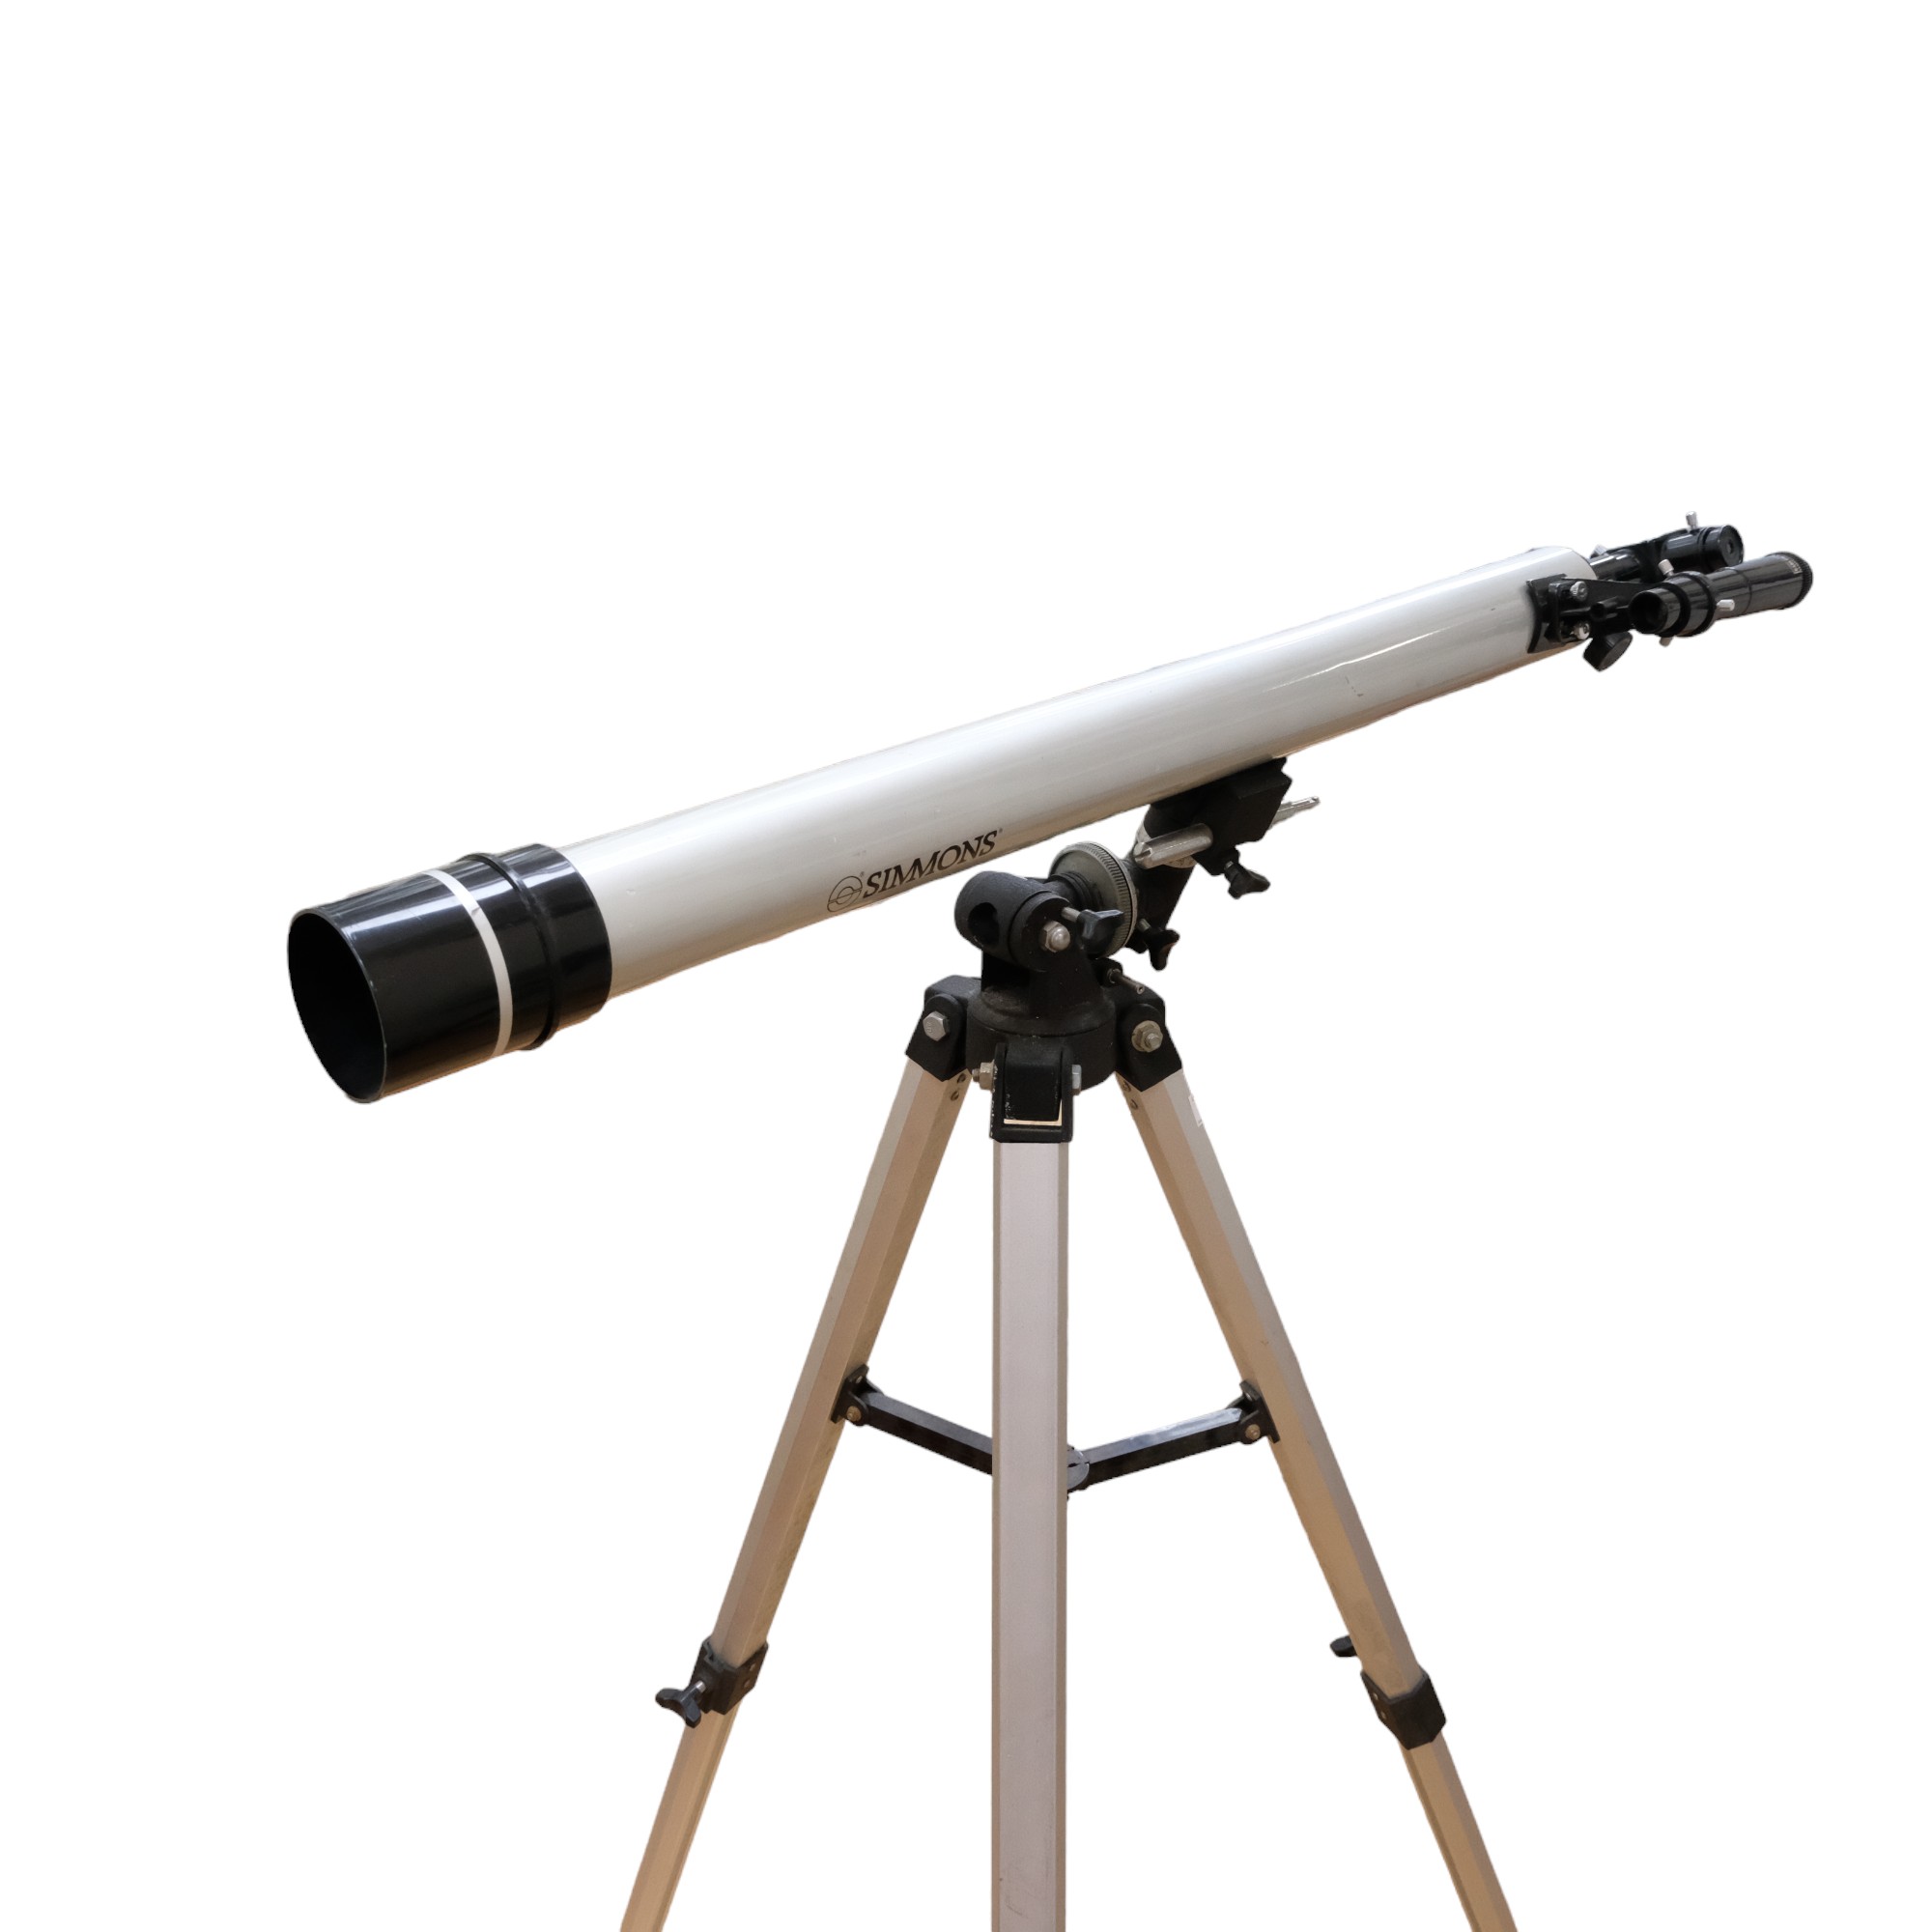 A Simmons telescope, with star spotter, equatorial mount and tripod, scope 92 cm, (optics clear) - Image 2 of 3